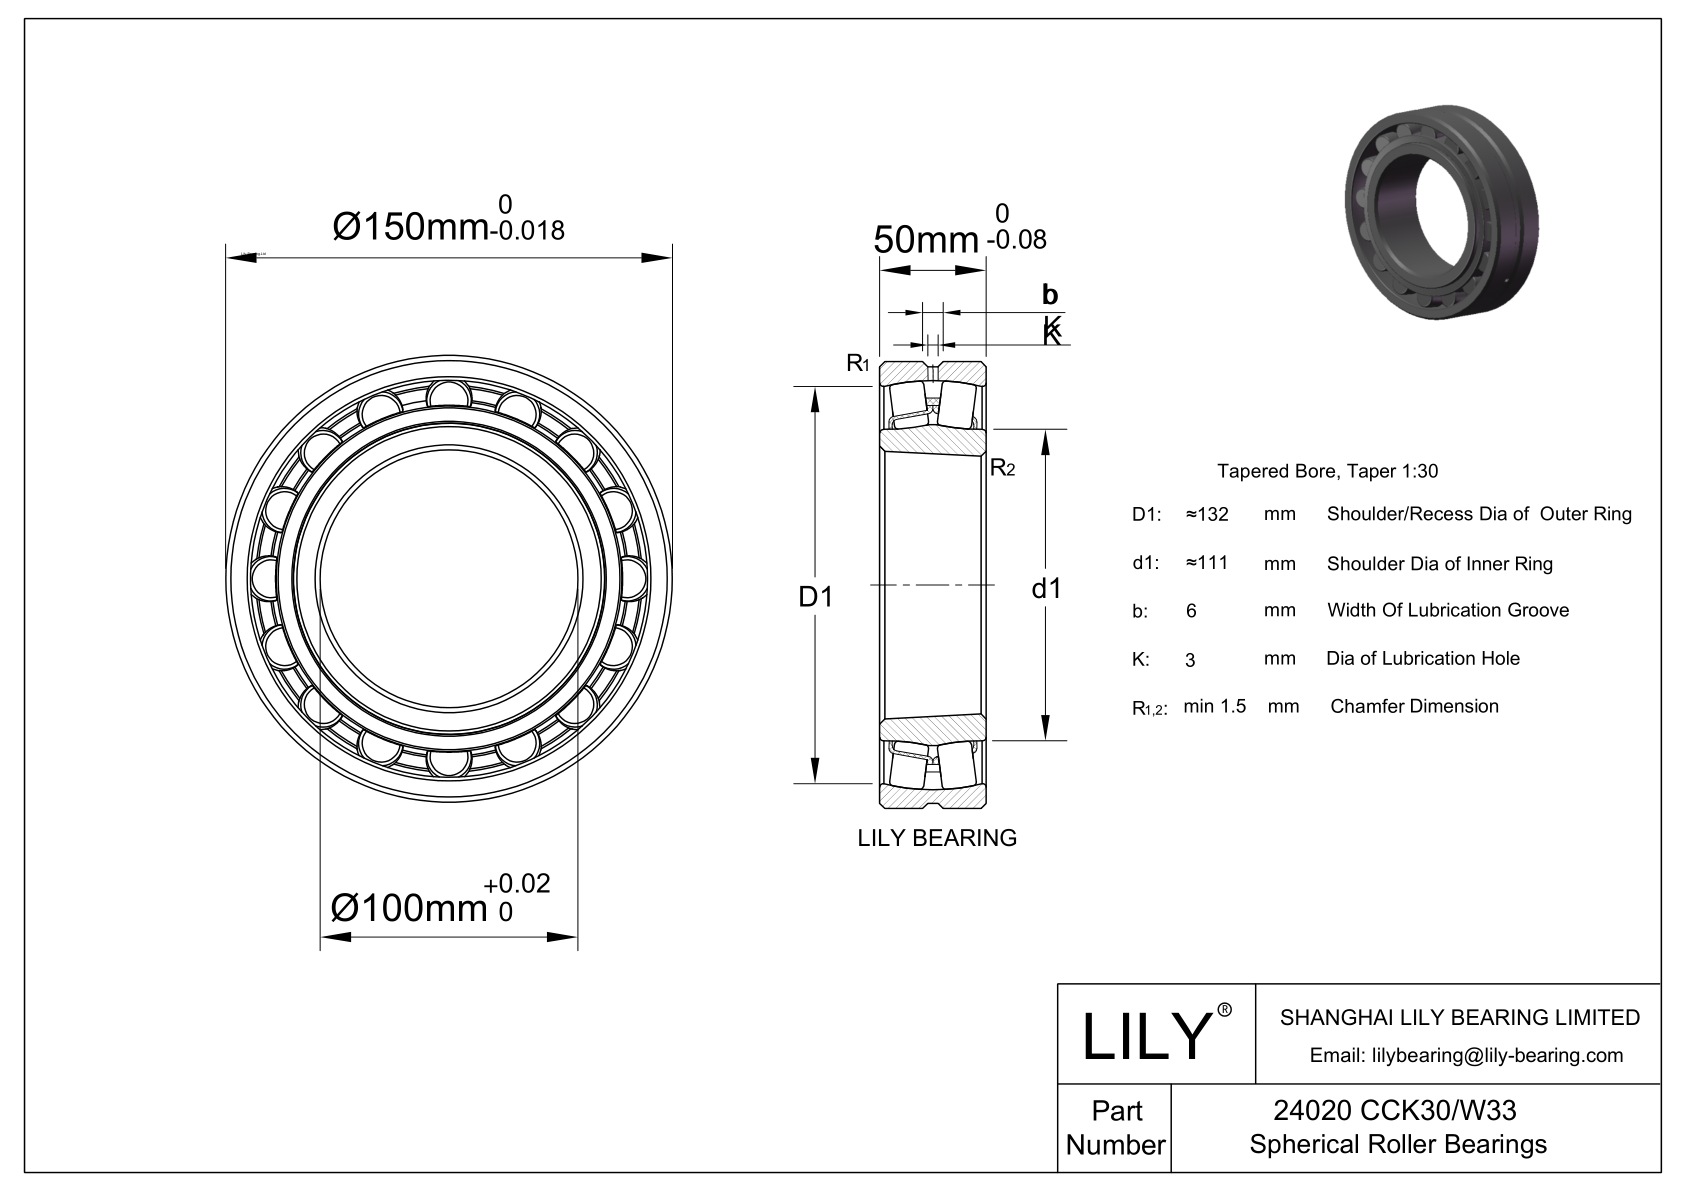 24020 CCK30/W33 Double Row Spherical Roller Bearing cad drawing